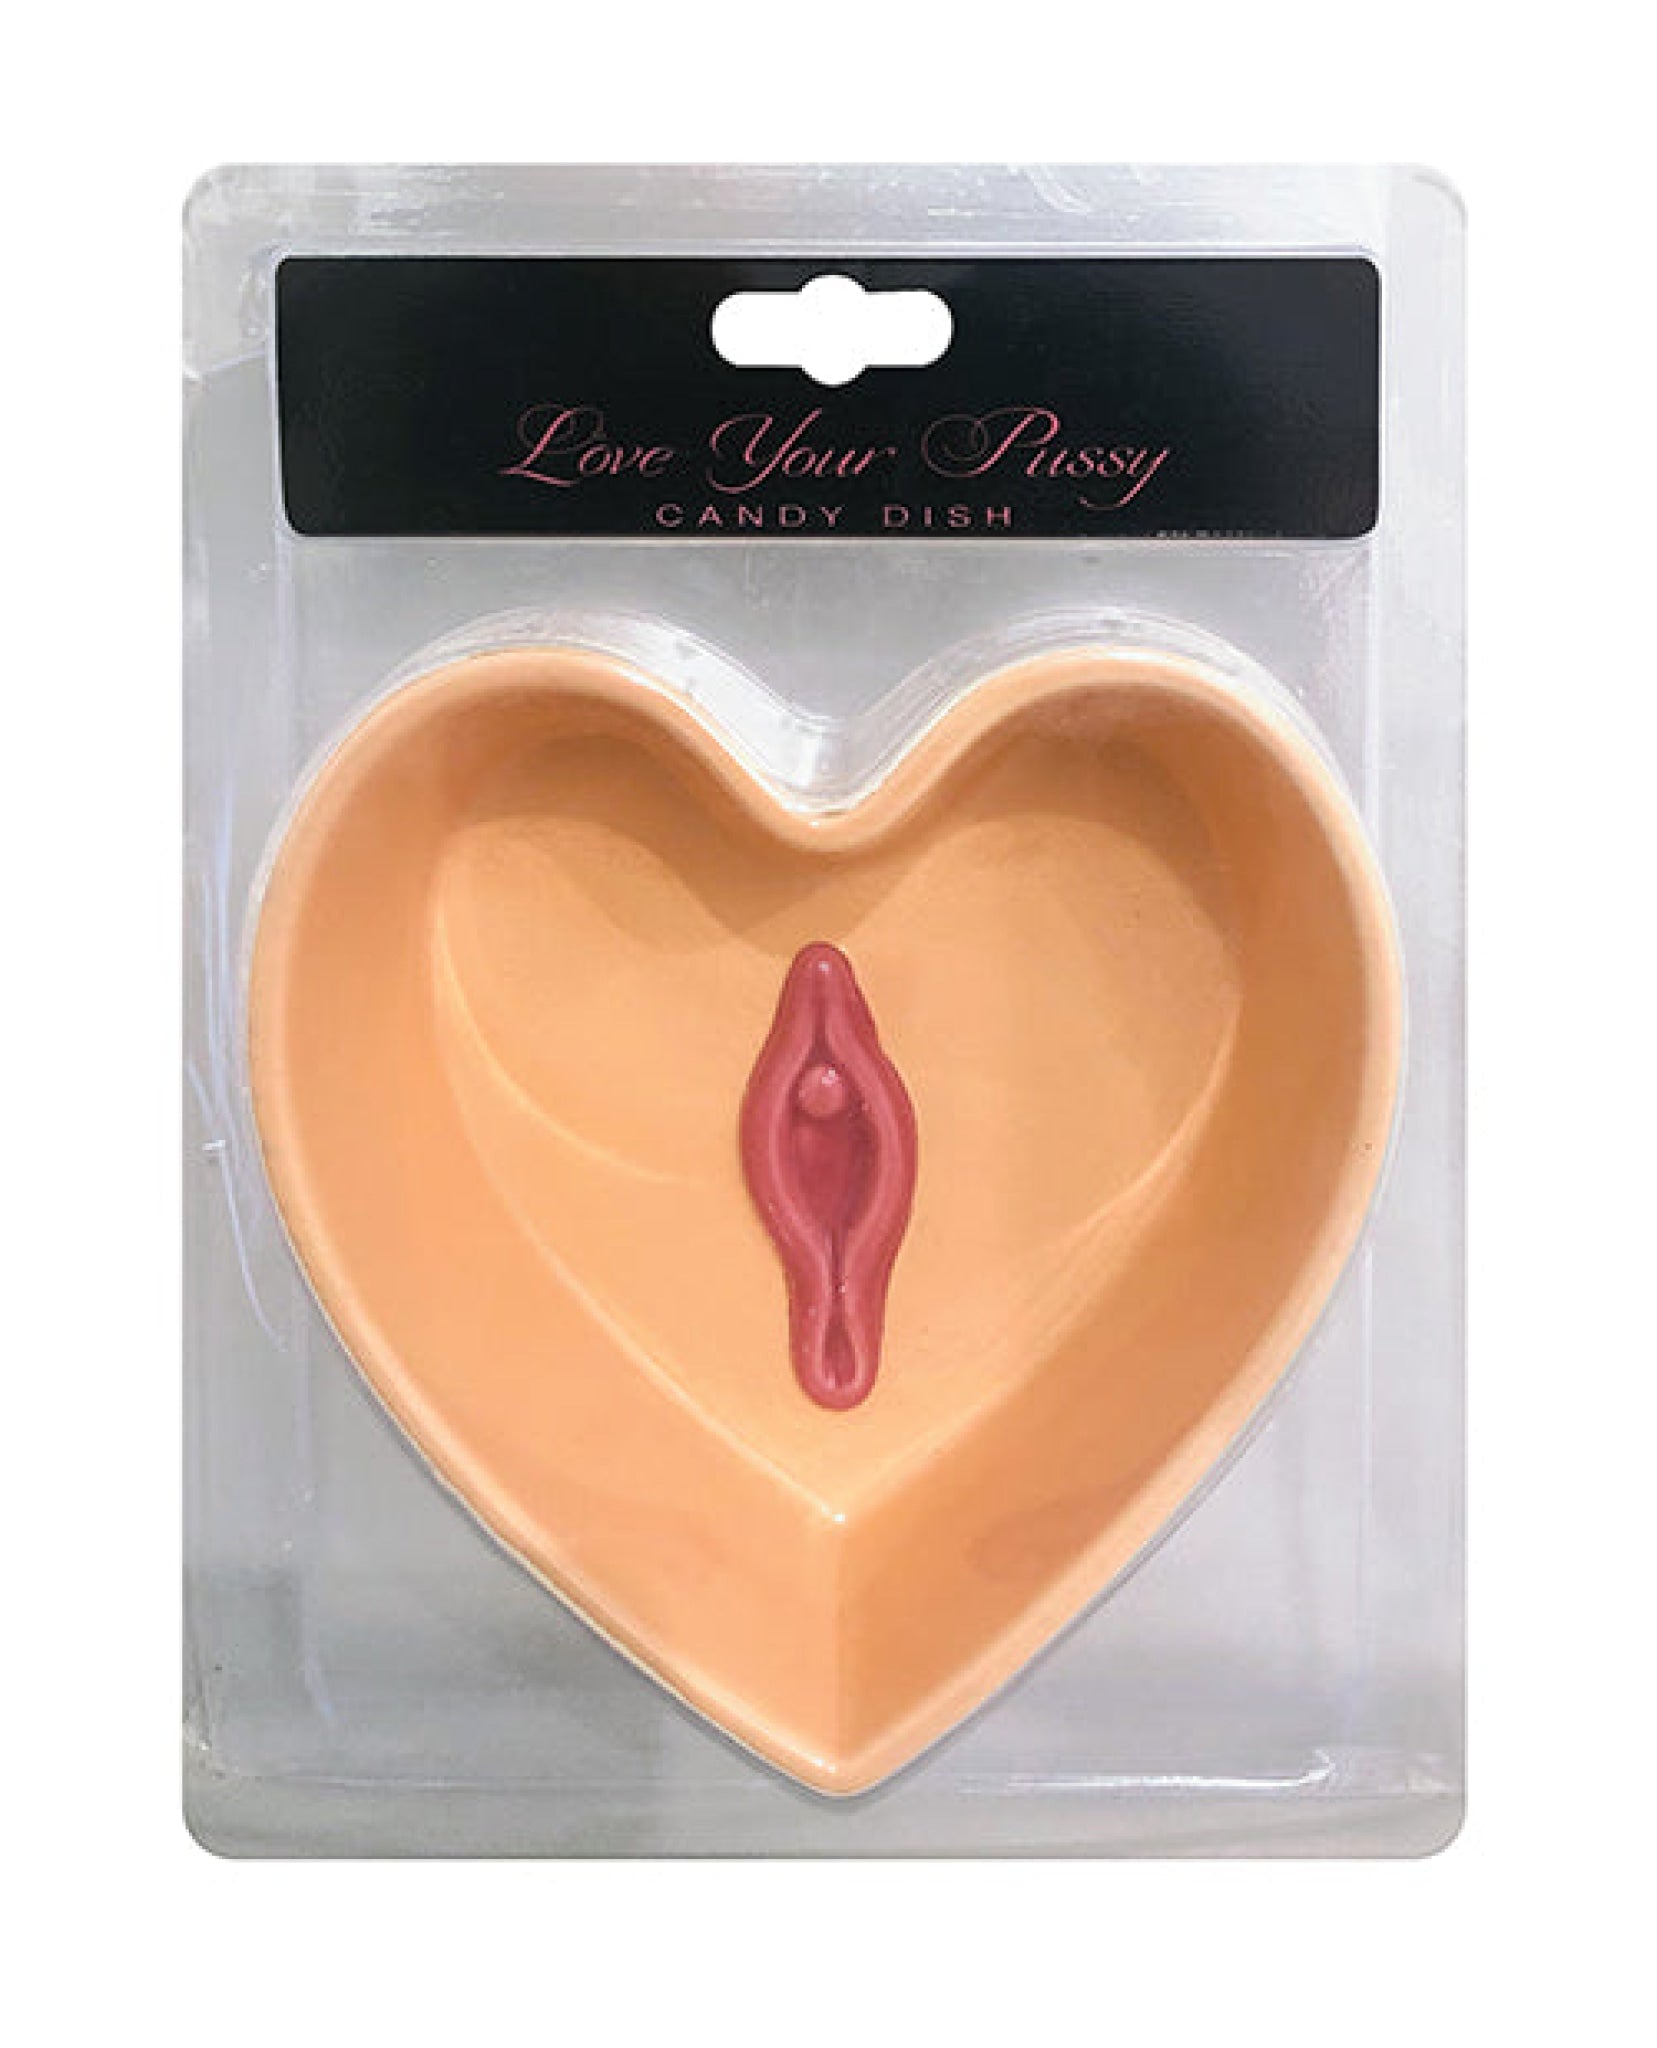 Love Your Pussy Candy Dish Kheper Games